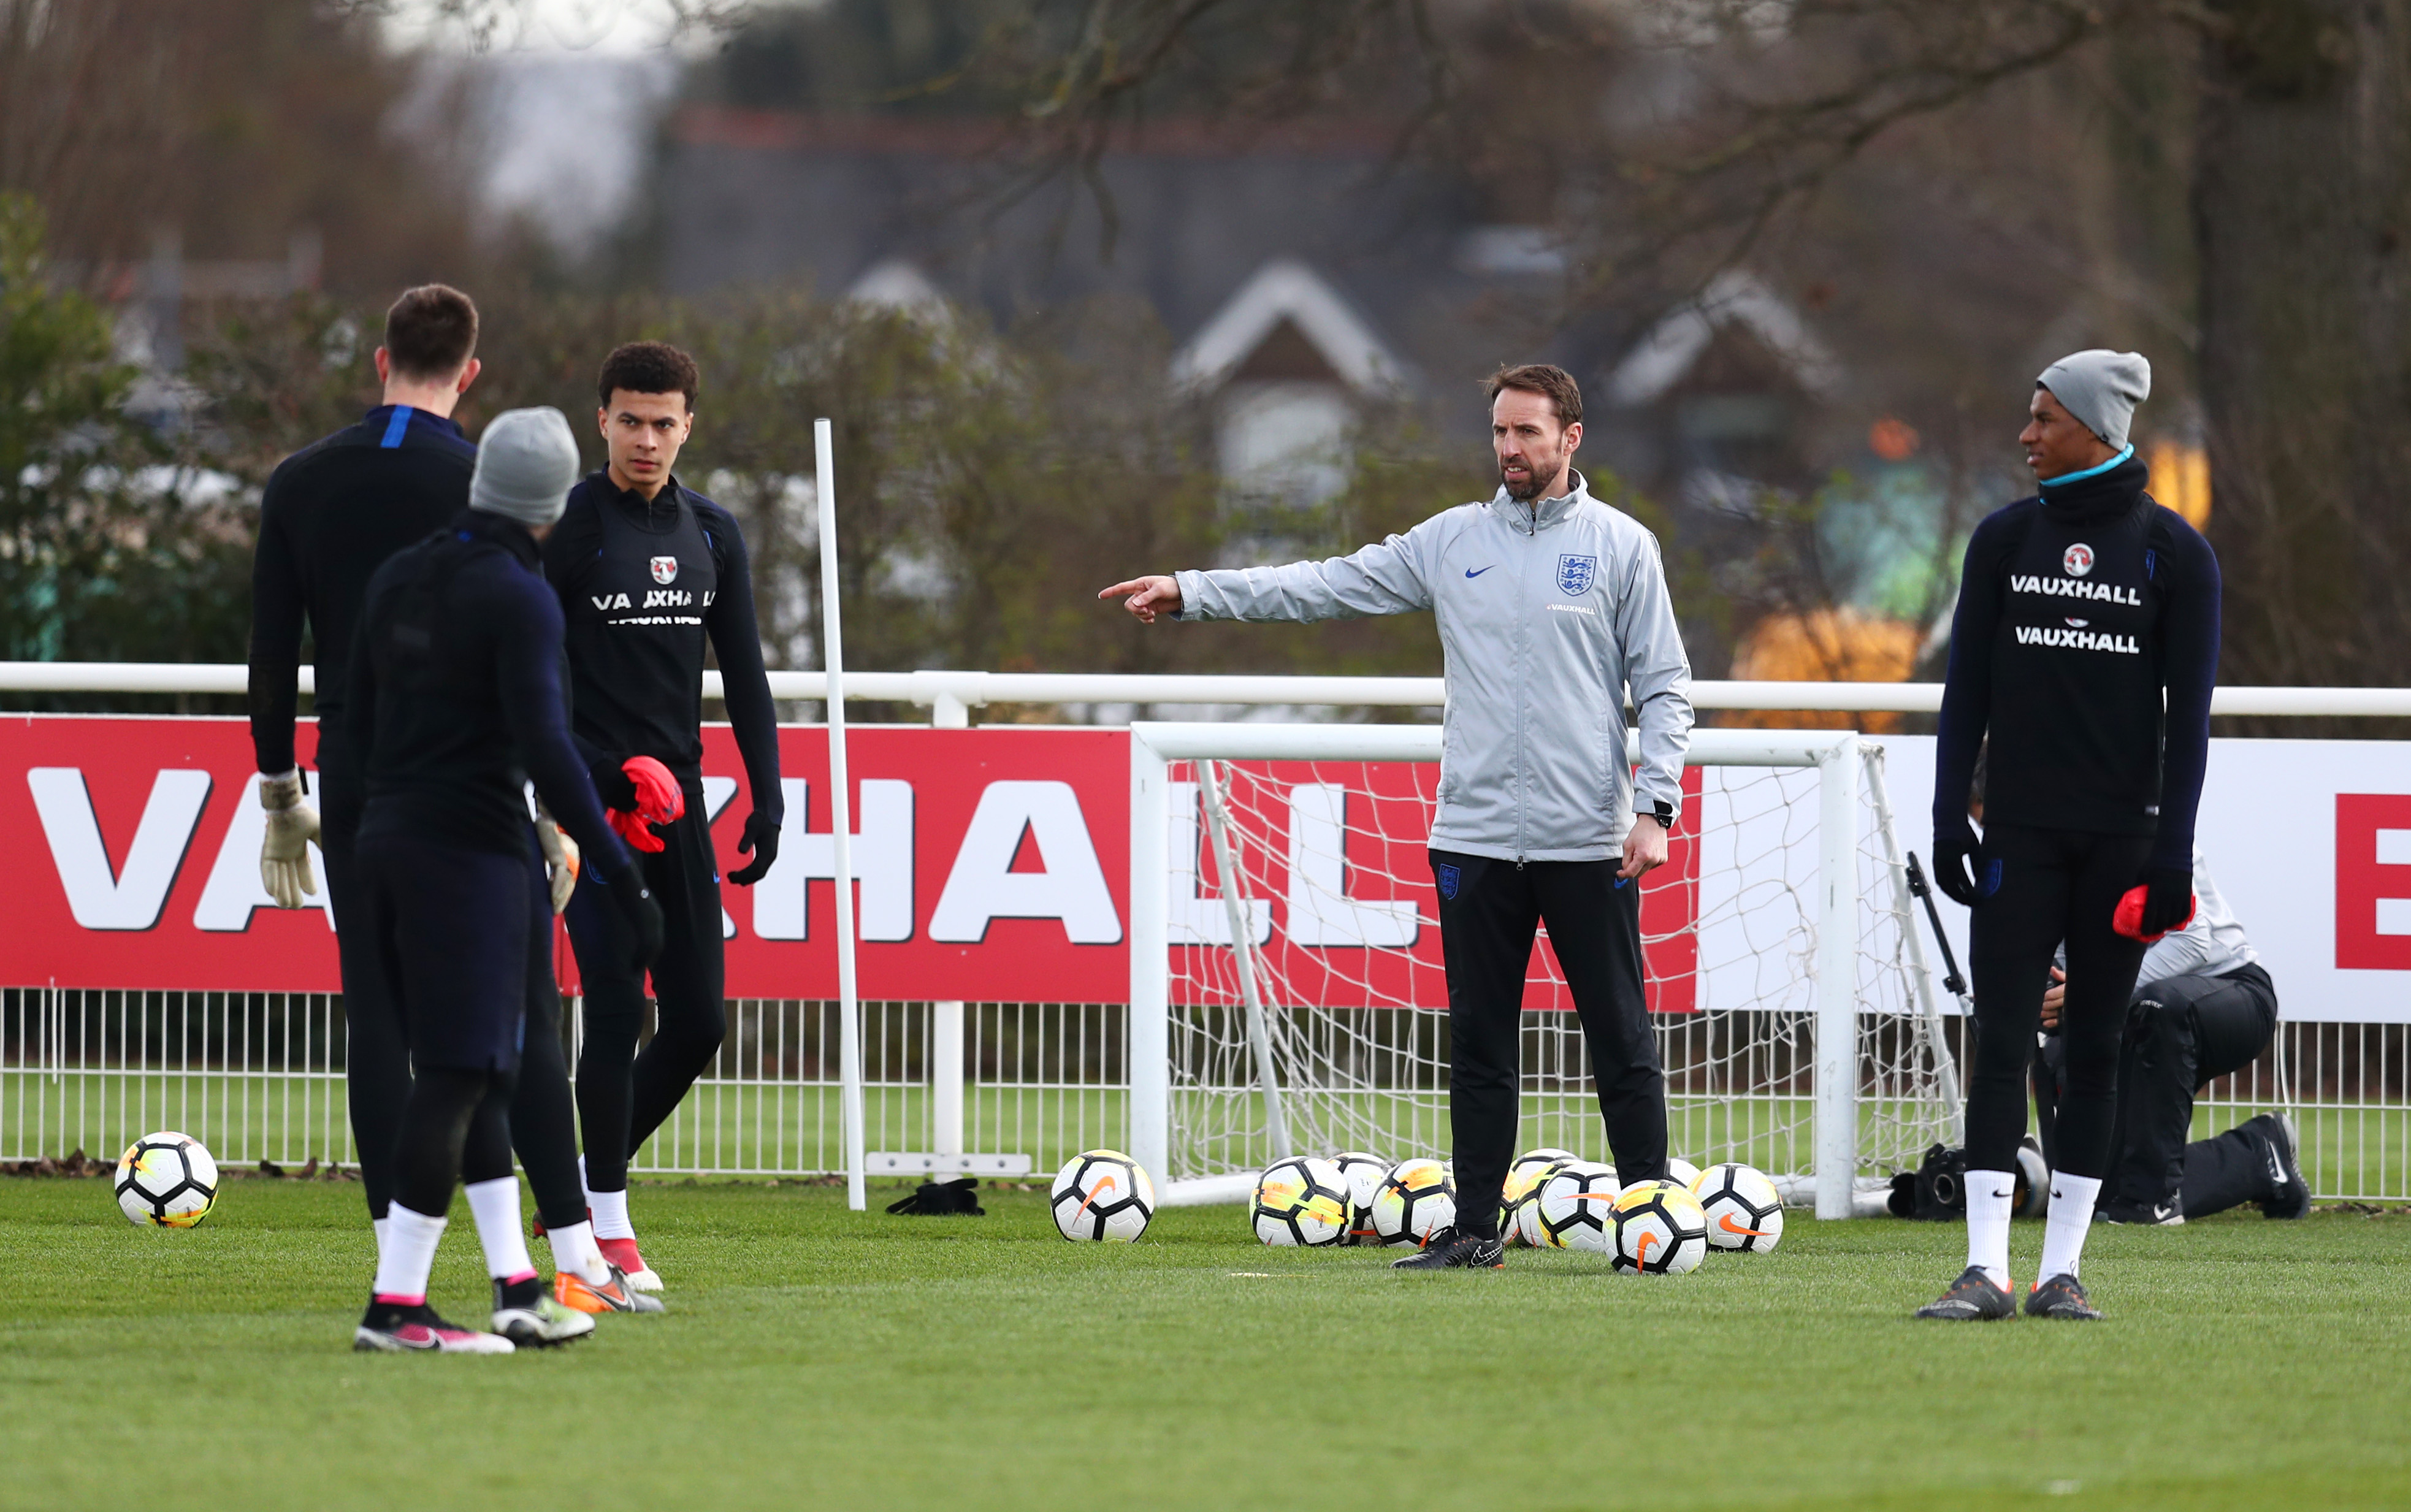 ENFIELD, ENGLAND - MARCH 26:  Gareth Southgate manager of England talks to players during an England training session, on the eve of their international friendly against Italy at Tottenham Hotspur Training Centre, on March 26, 2018 in Enfield, England.  (Photo by Catherine Ivill/Getty Images)